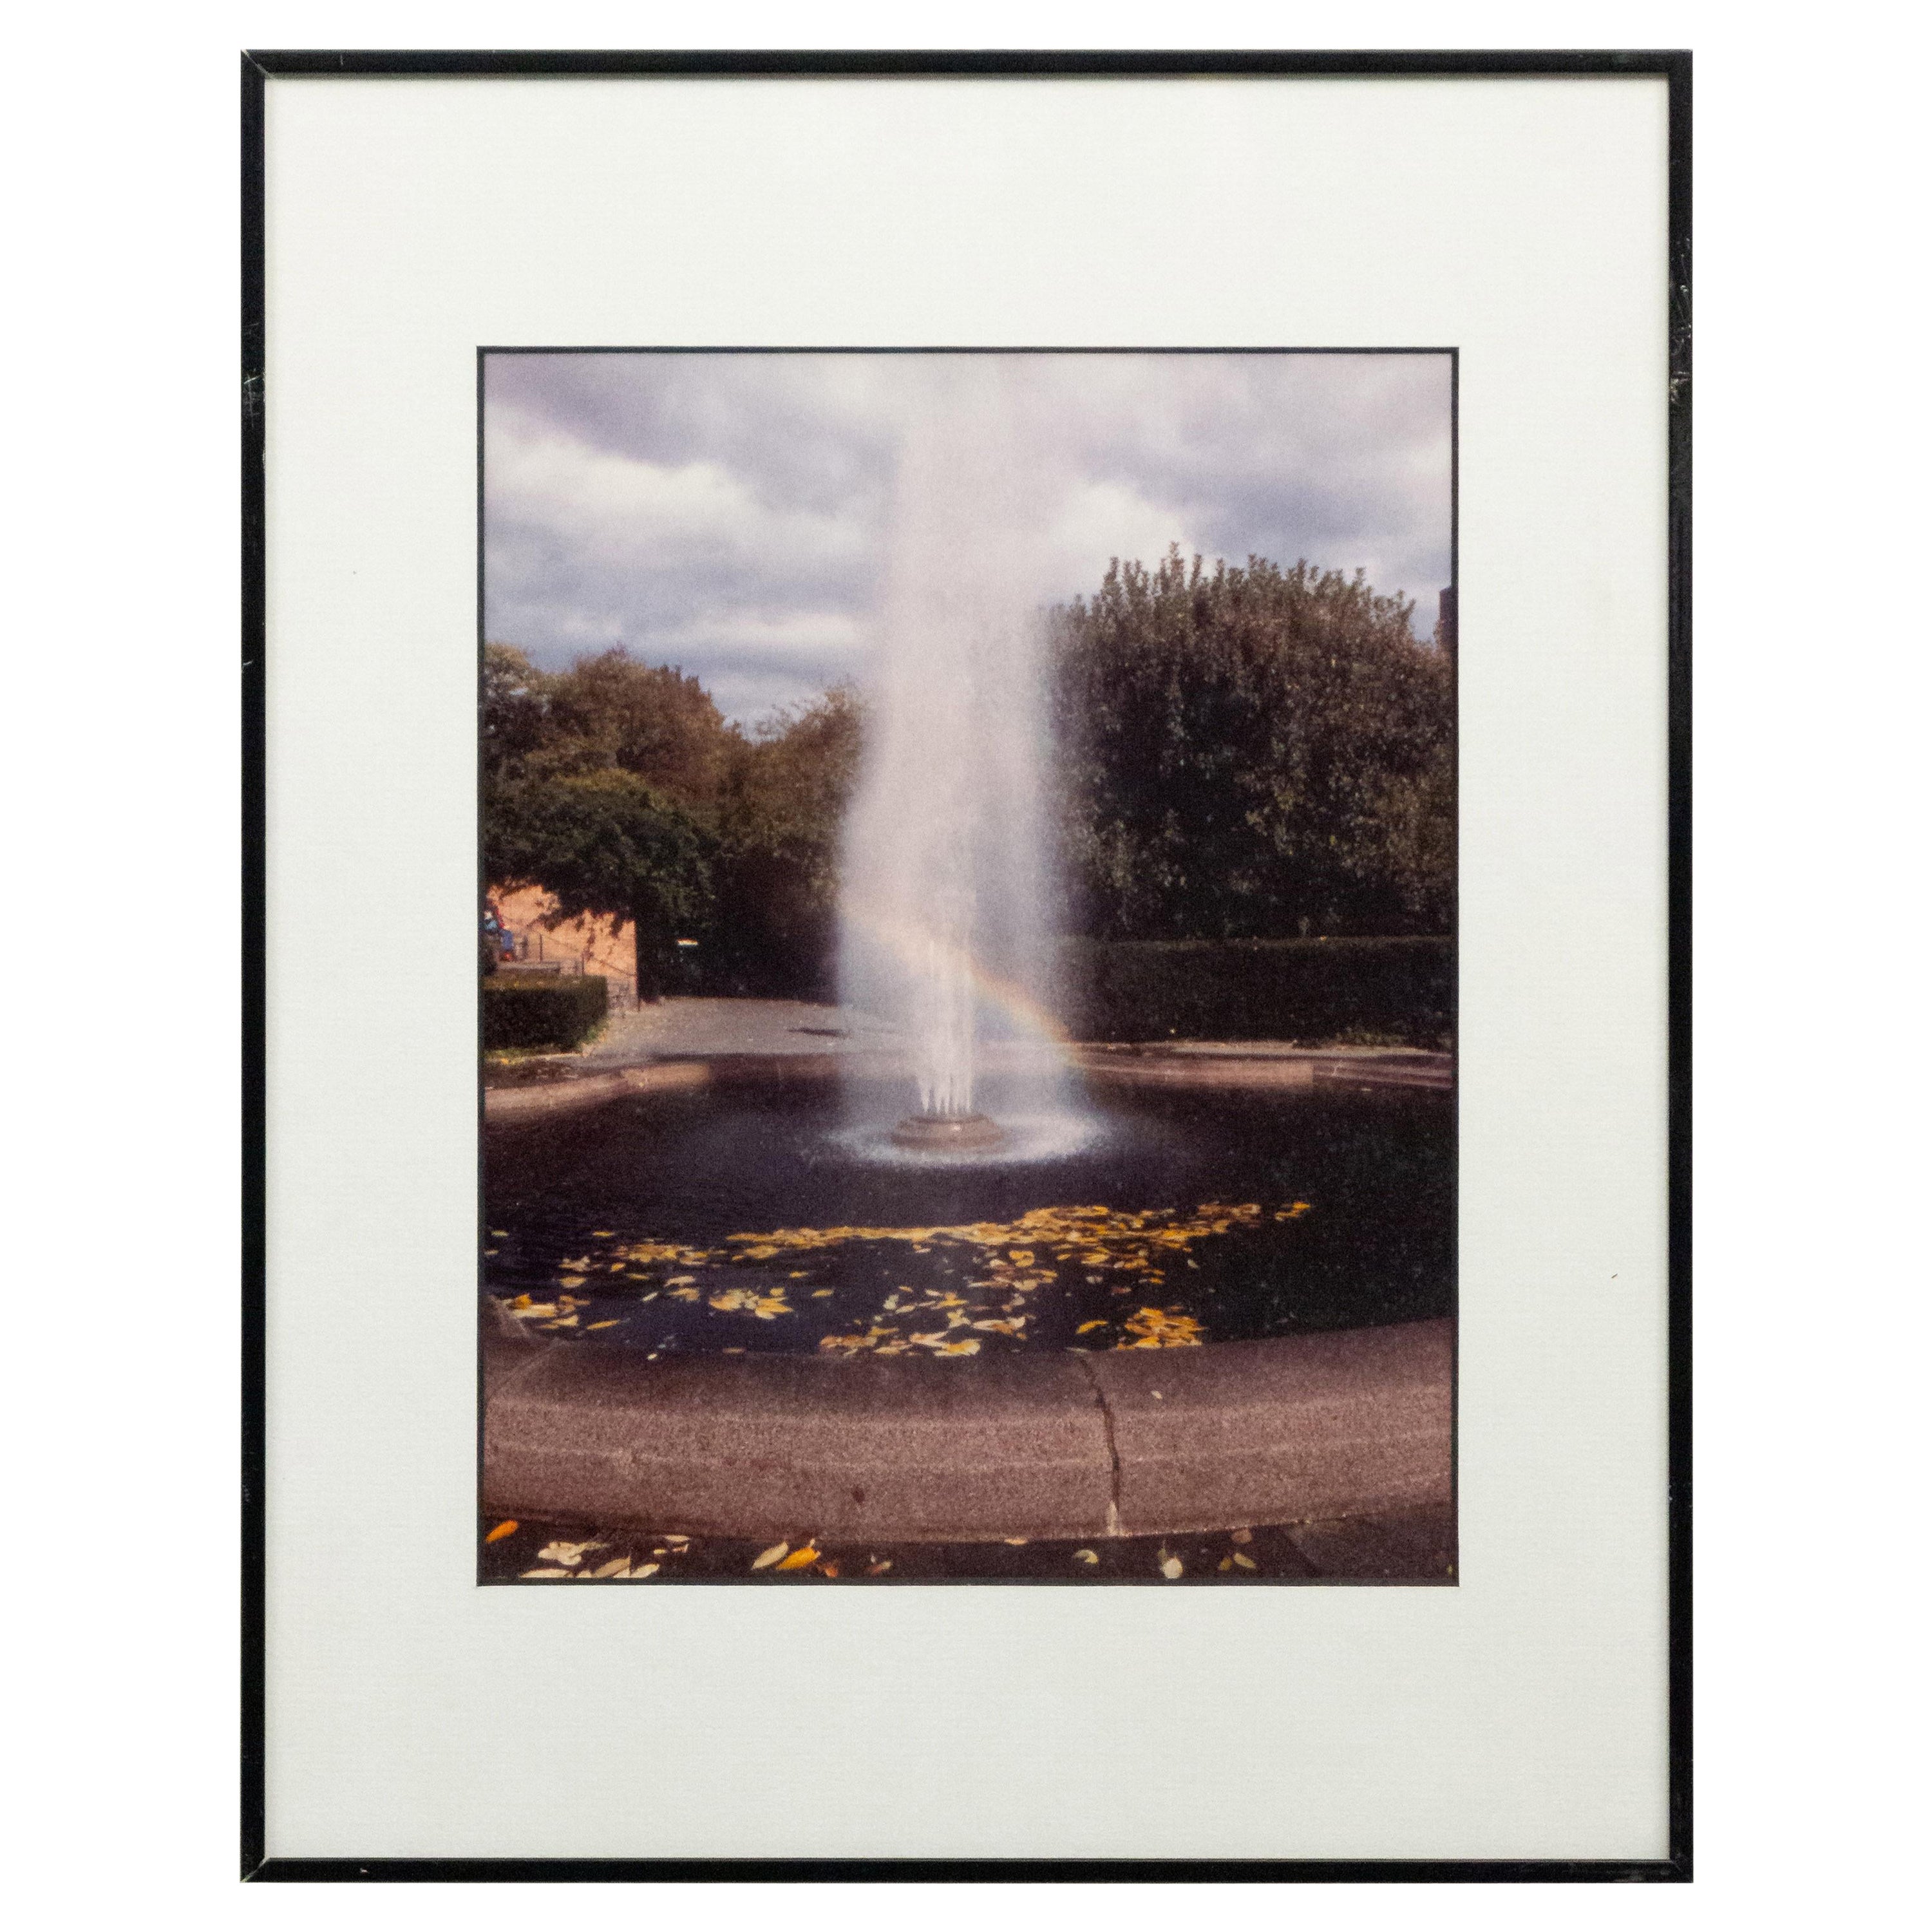 Vintage Color Photograph of Fountain in a Park with Rainbow